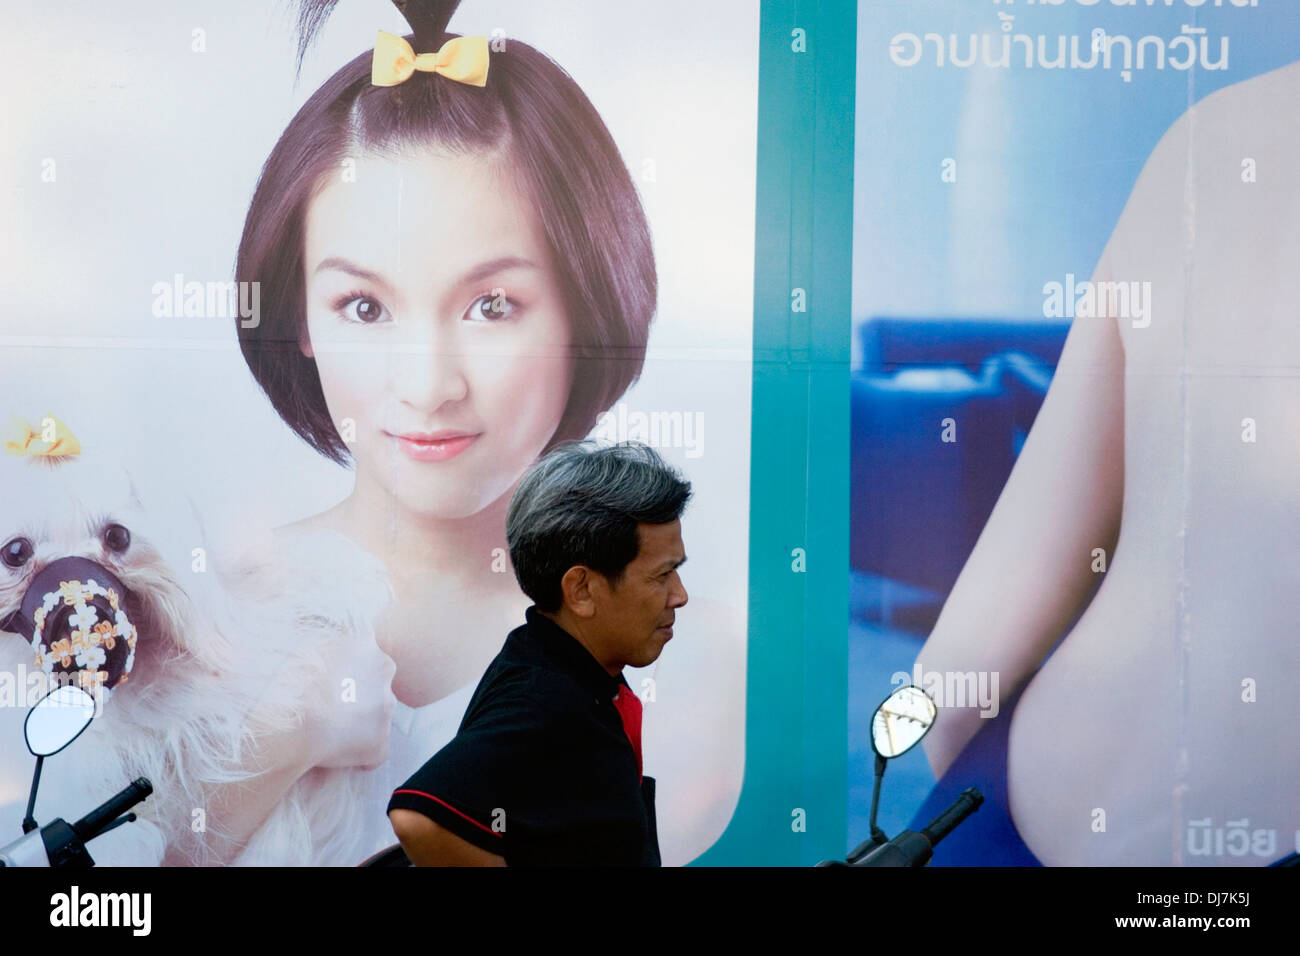 A man is walking past a sign with a young model advertising a product on a city street in Khon Kaen, Thailand. Stock Photo